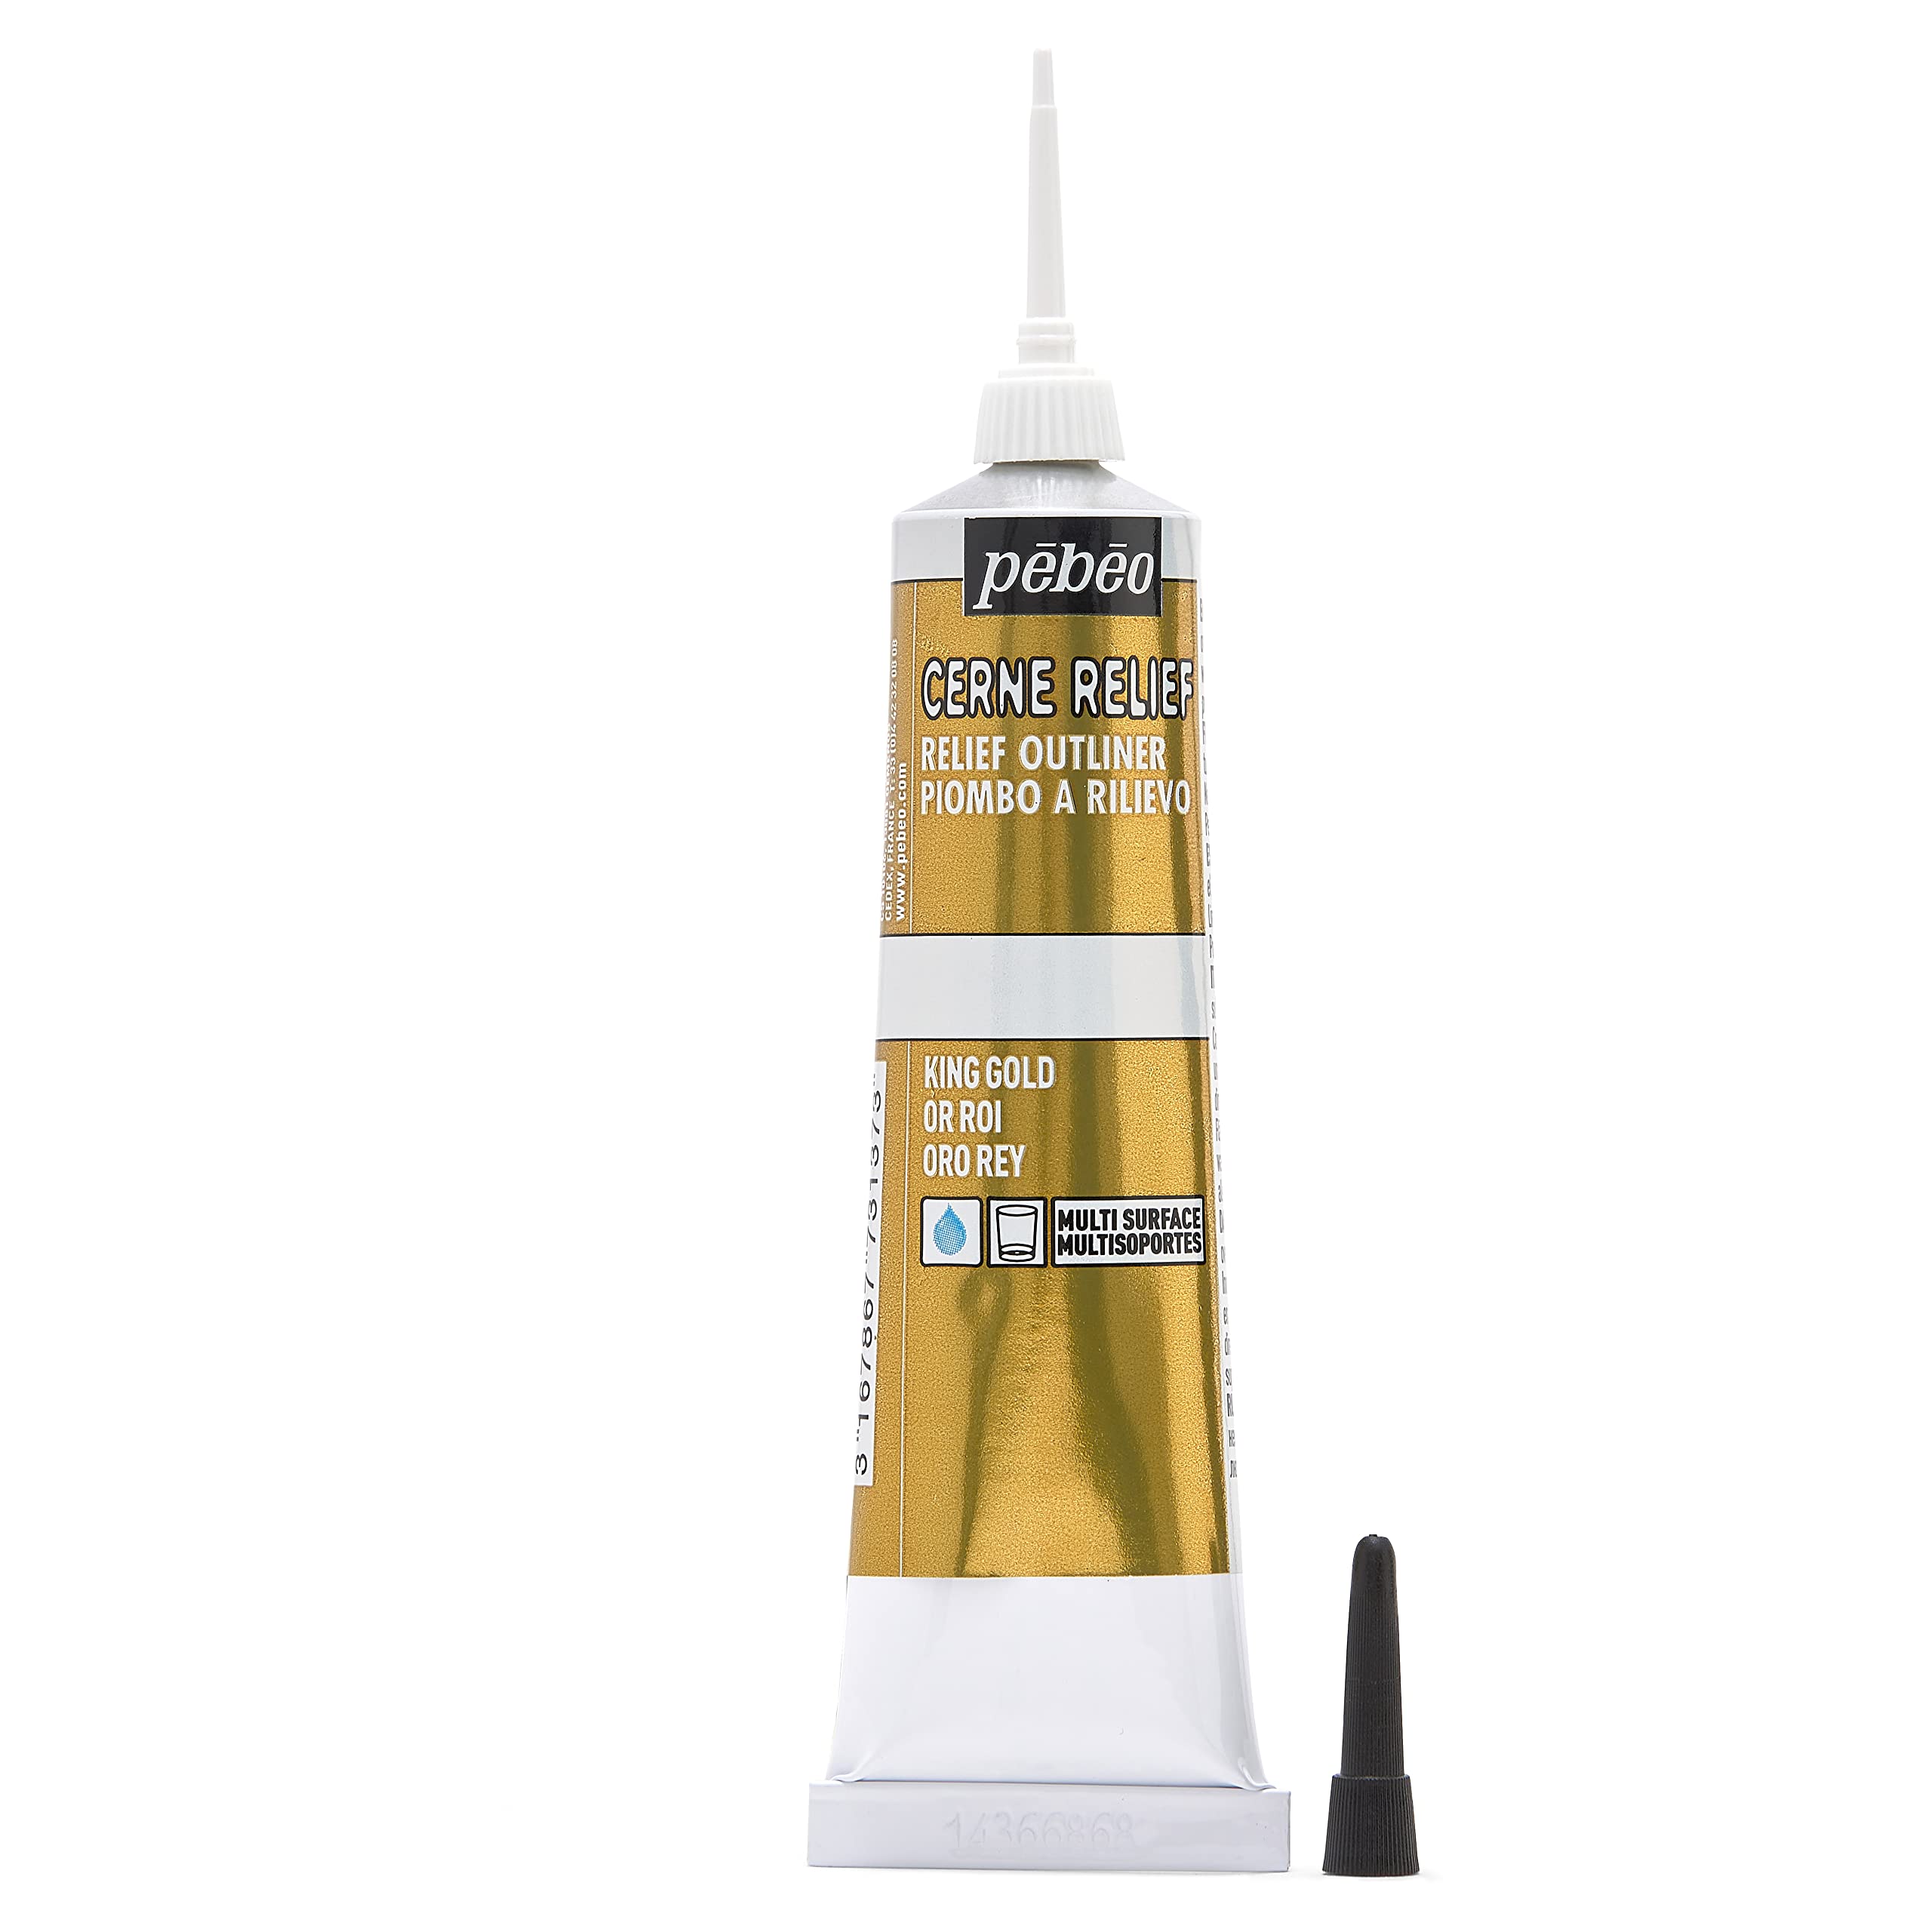 Pebeo Vitrail, Cerne Relief Dimensional Paint, 37 ml Tube with Nozzle - King Gold, 1.25 Fl Oz (Pack of 1)